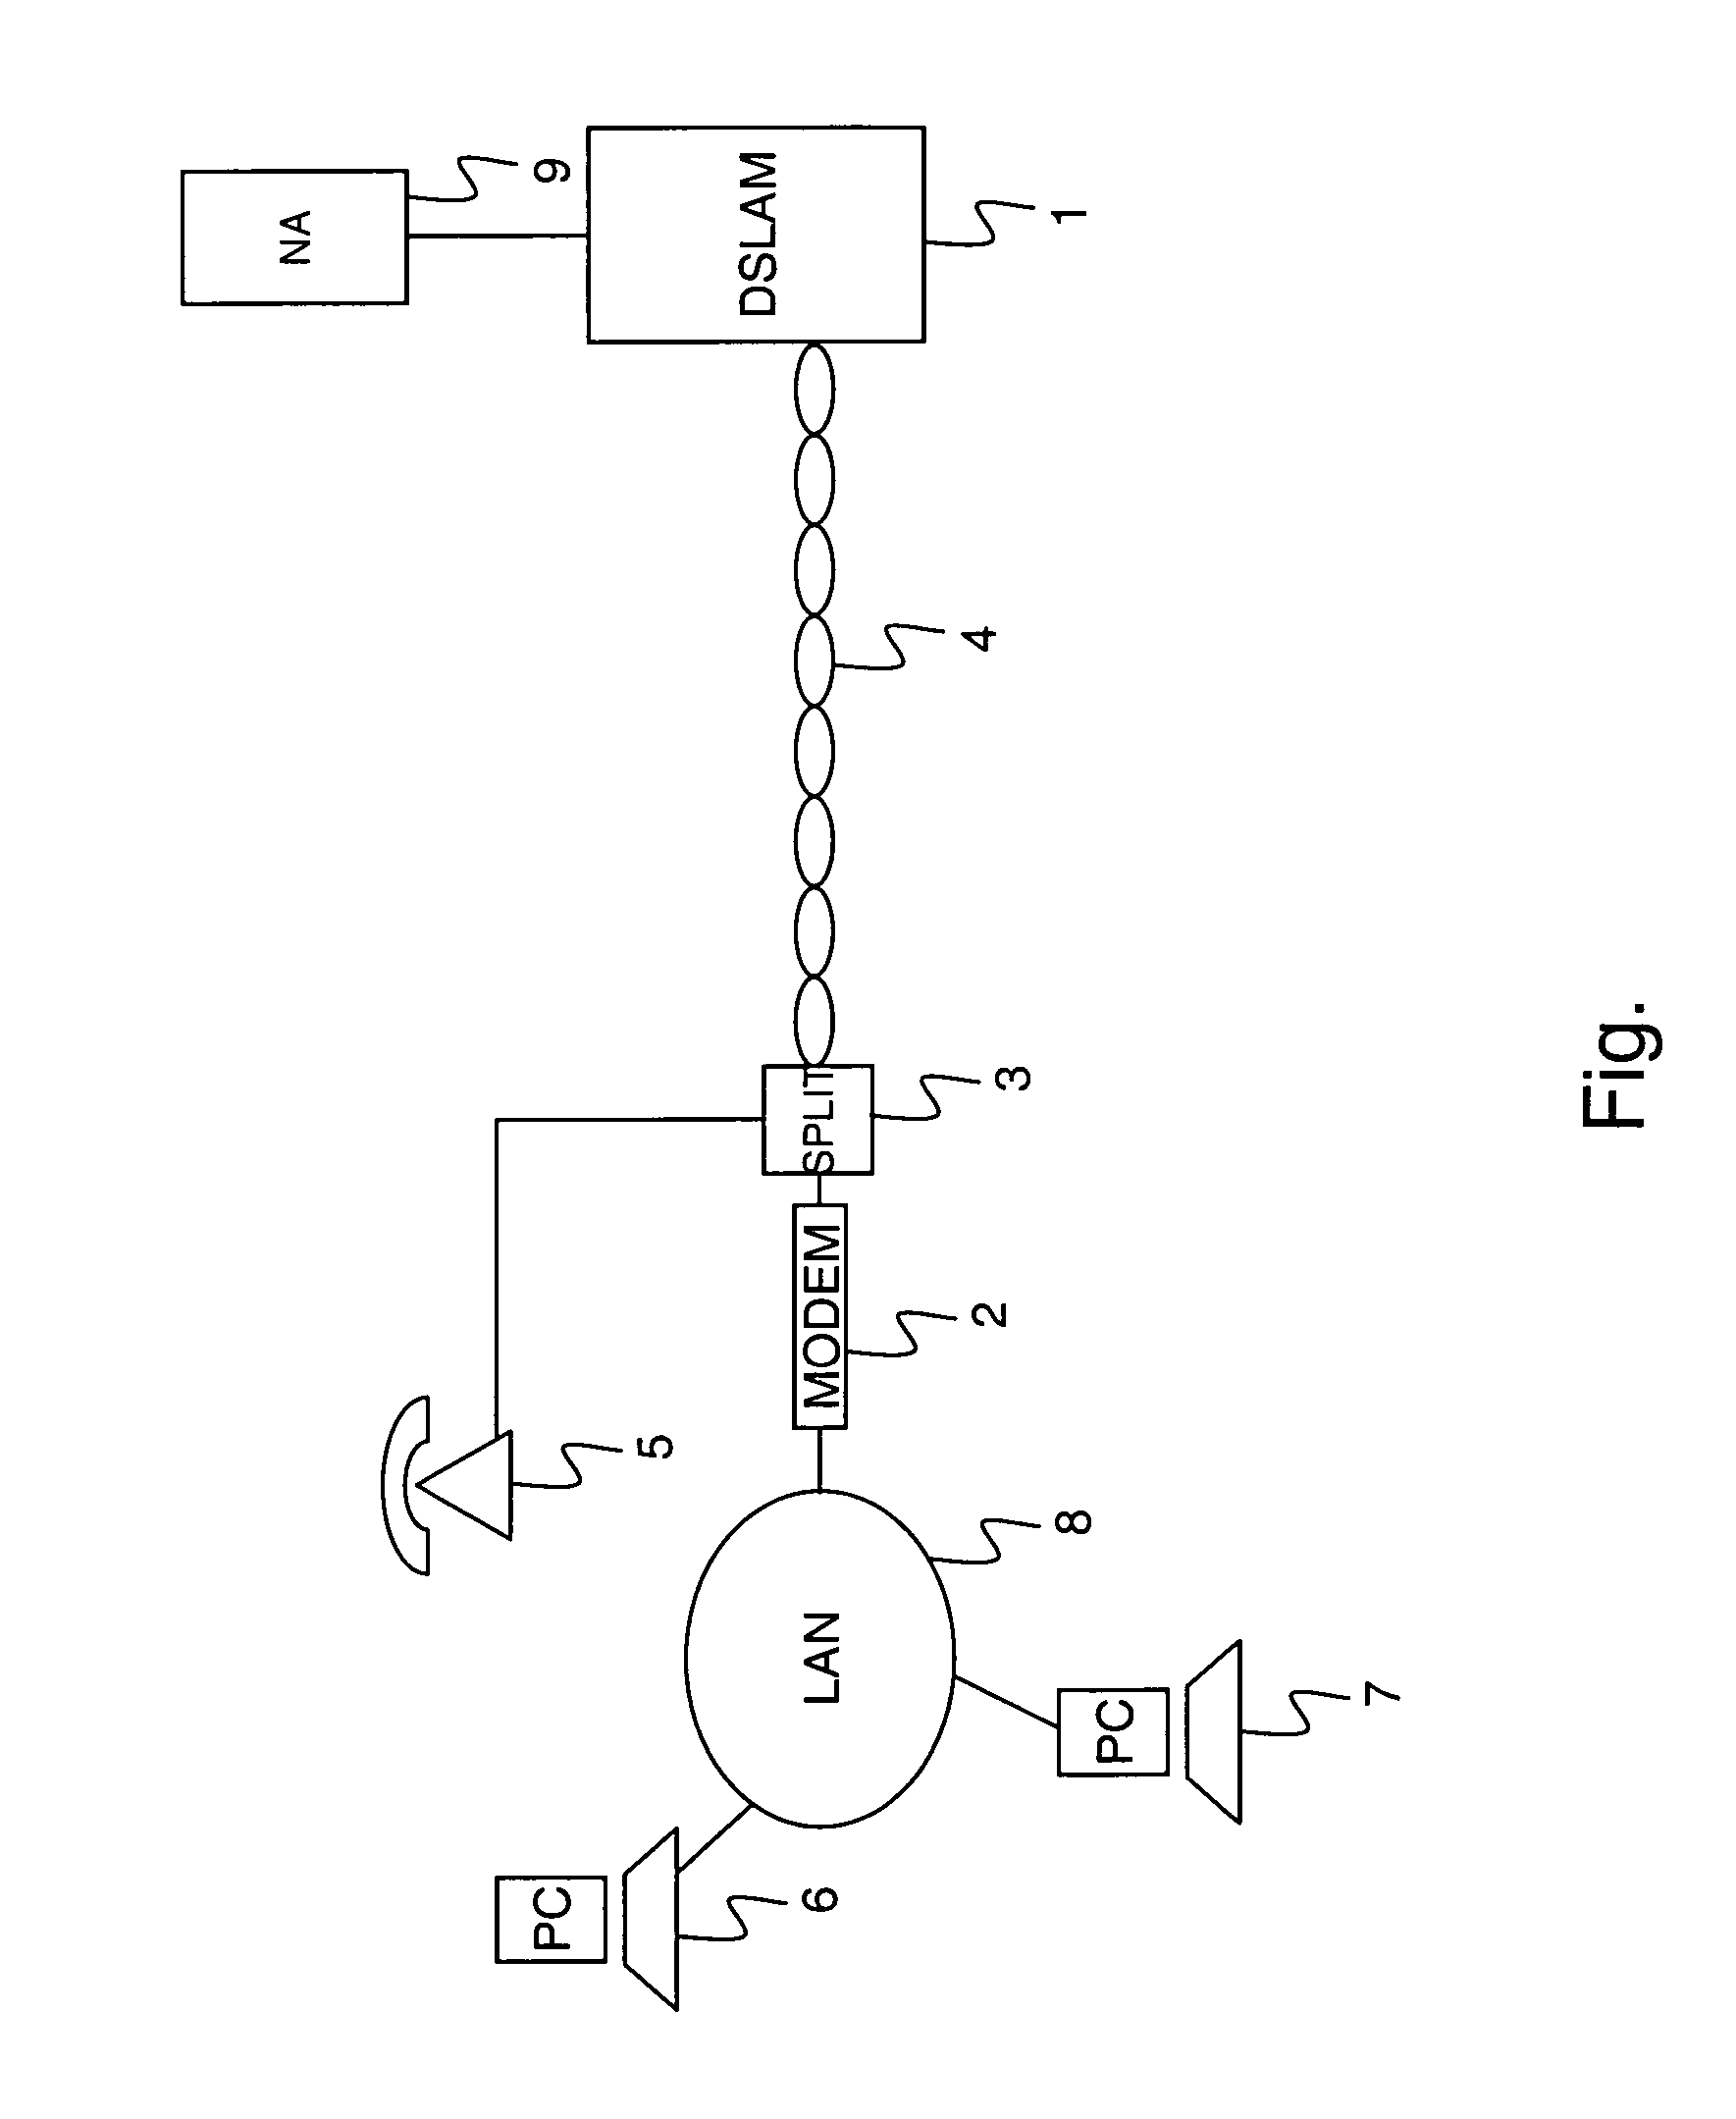 Test method and apparatus for in-house wiring problems